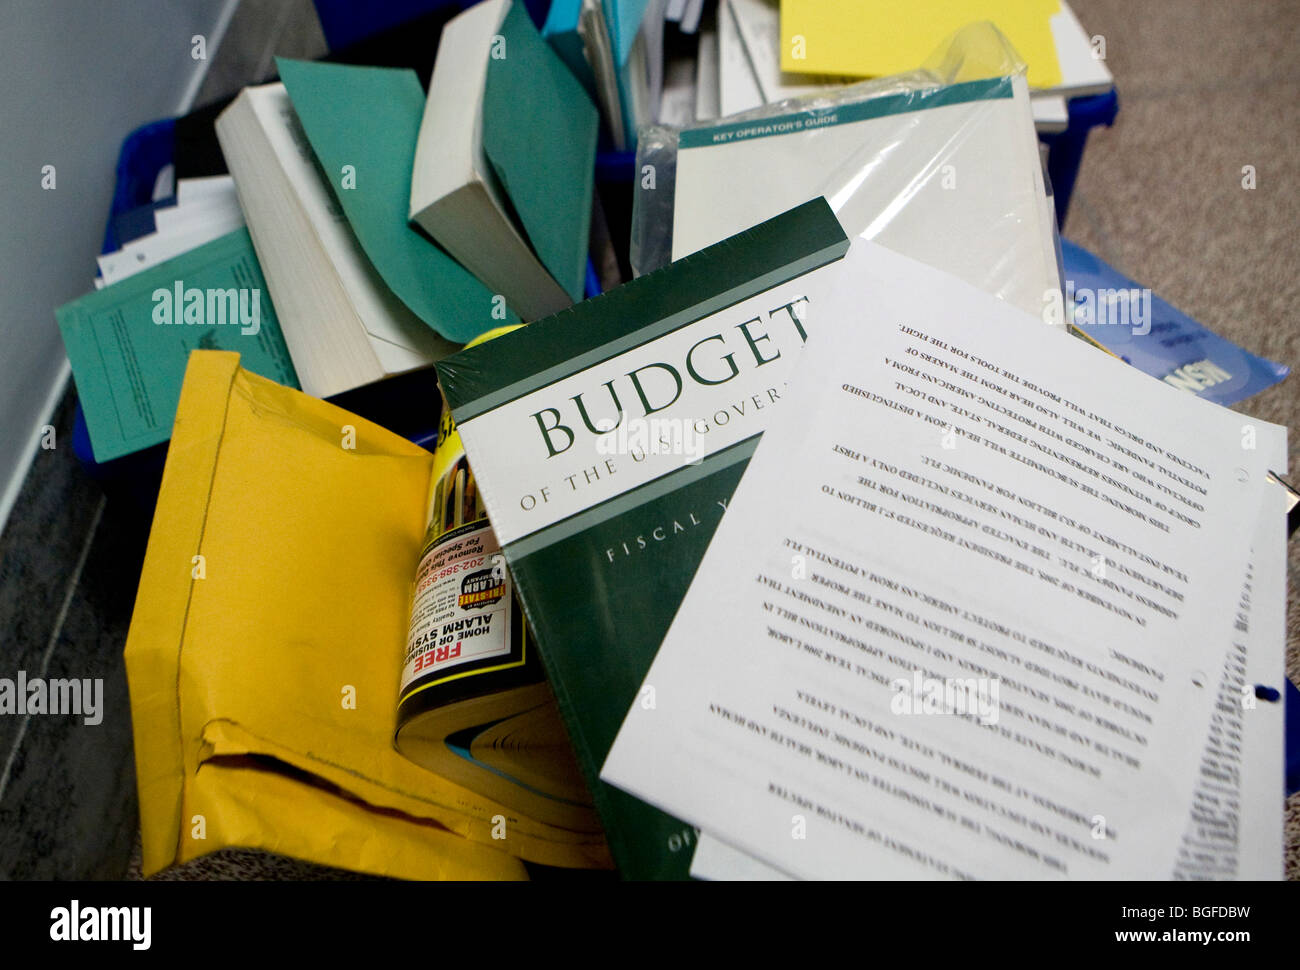 20 May 2009 – Washington, D.C. – A discarded copy of the Federal Budget still in its wrapping sits in a recycle bin outside of an office in the Dirksen Senate Office Building. Stock Photo